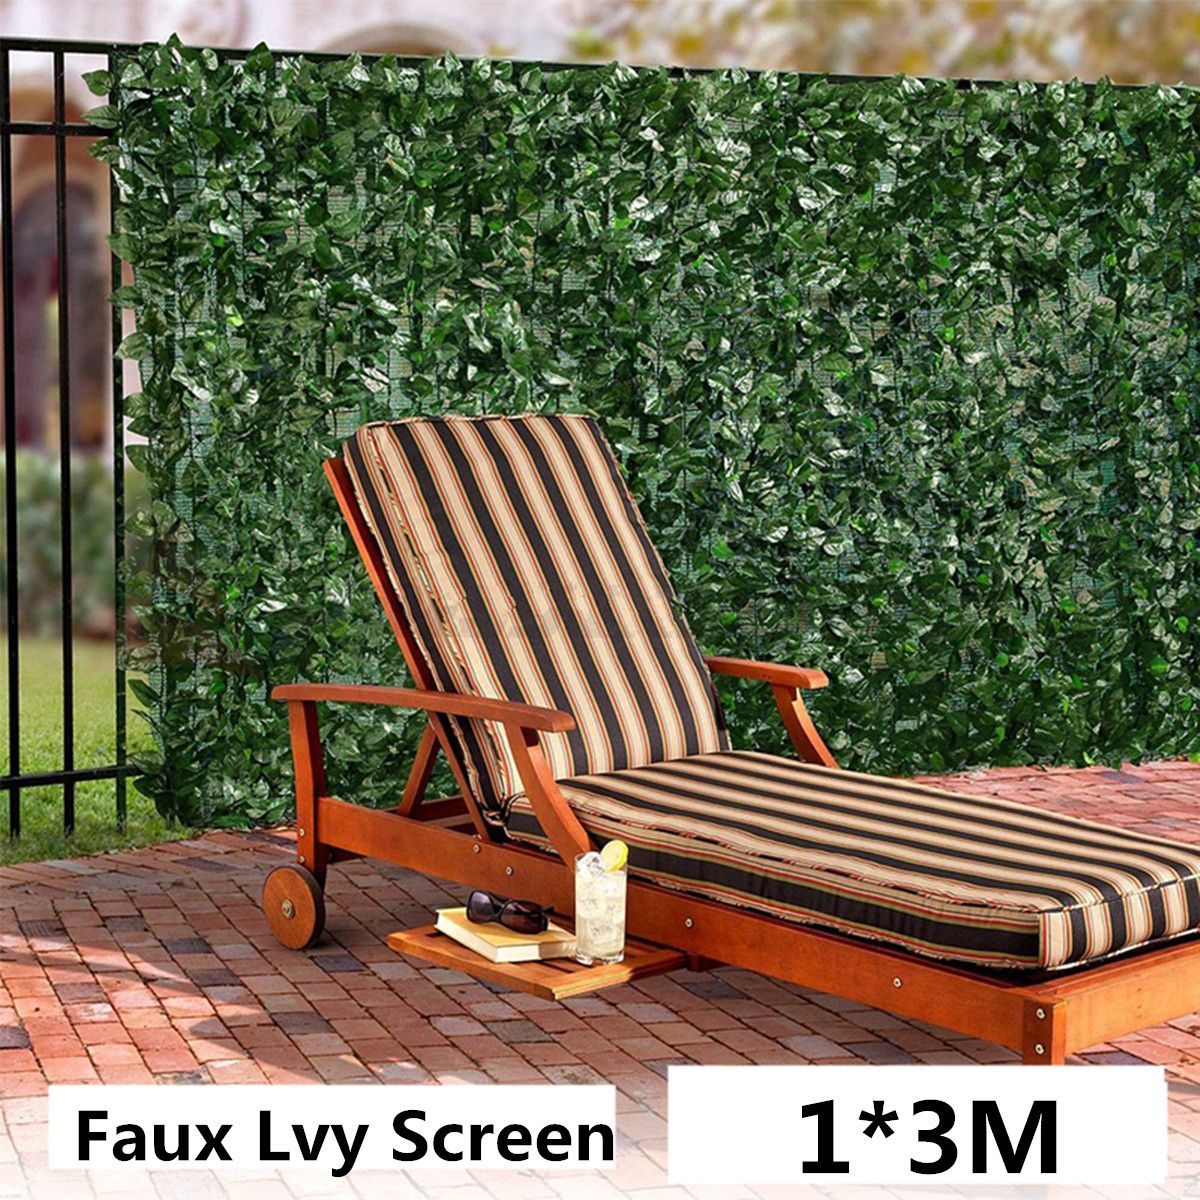 Expanding-13M-Artificial-Lvy-Leaf-Wall-Fence-Green-Garden-Screen-Hedge-Decorations-1474970